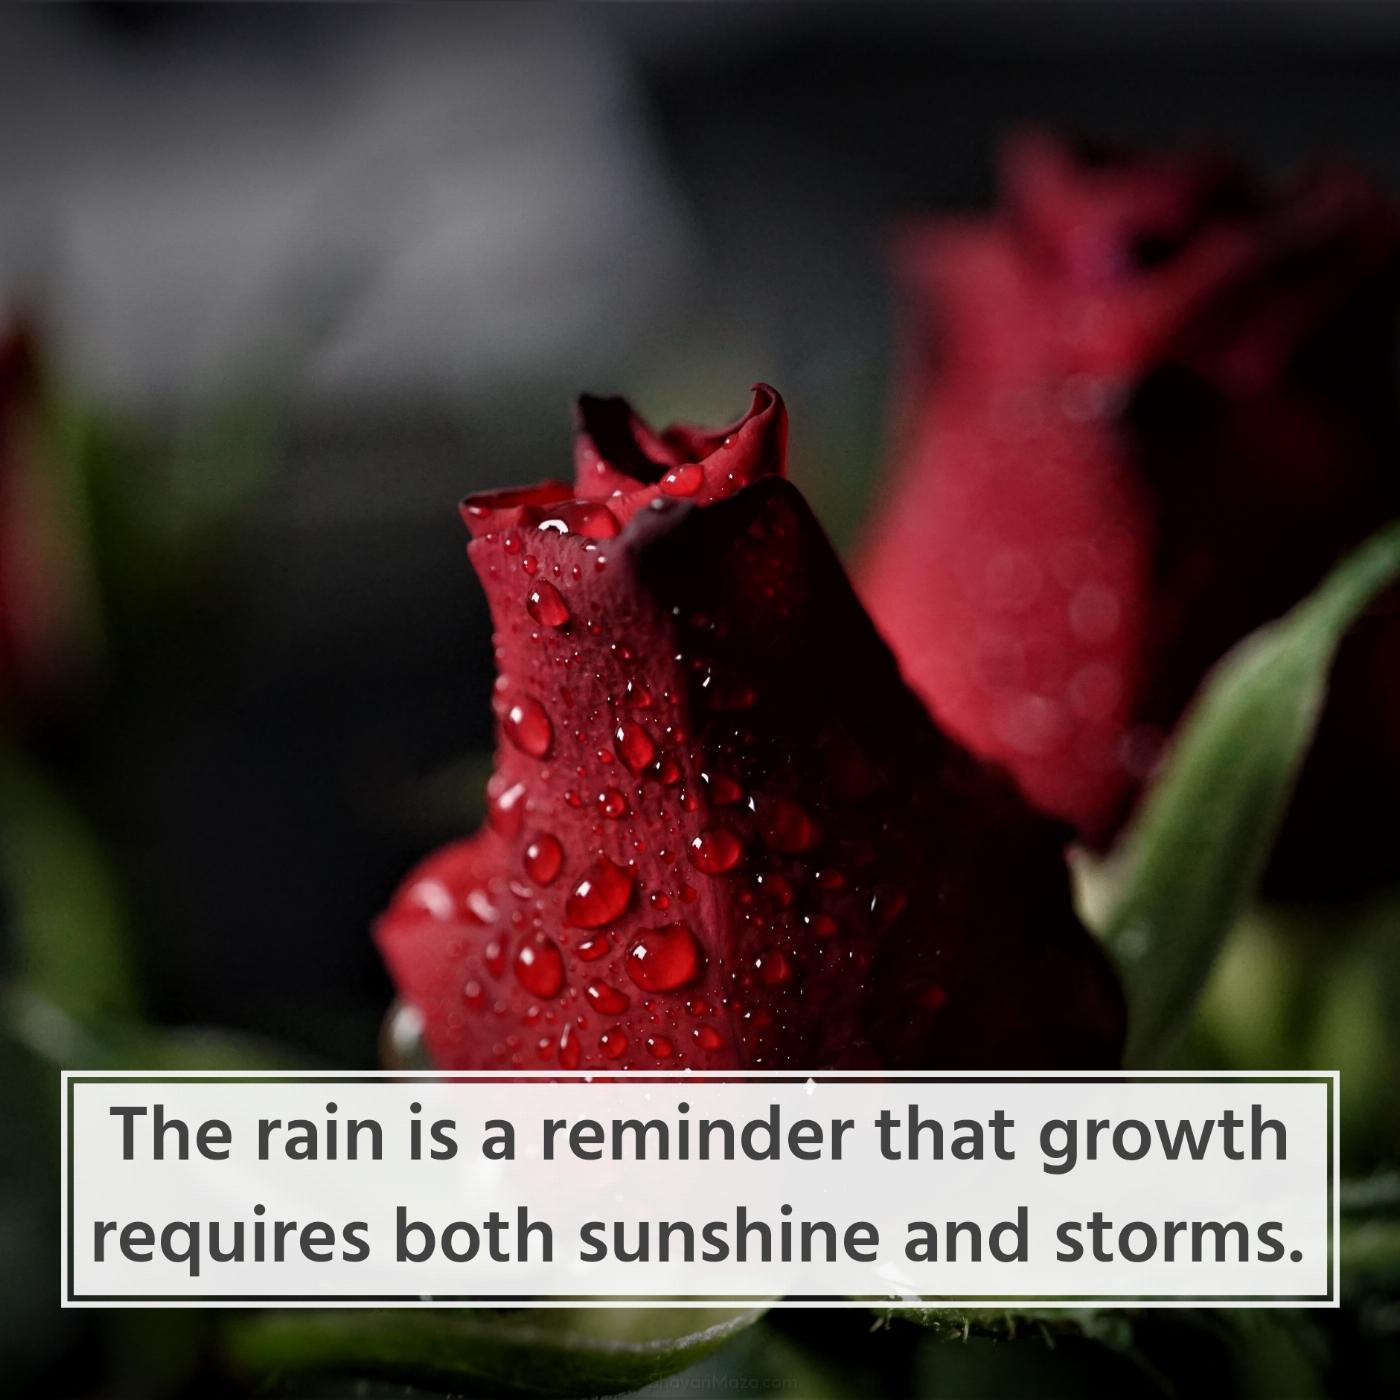 The rain is a reminder that growth requires both sunshine and storms